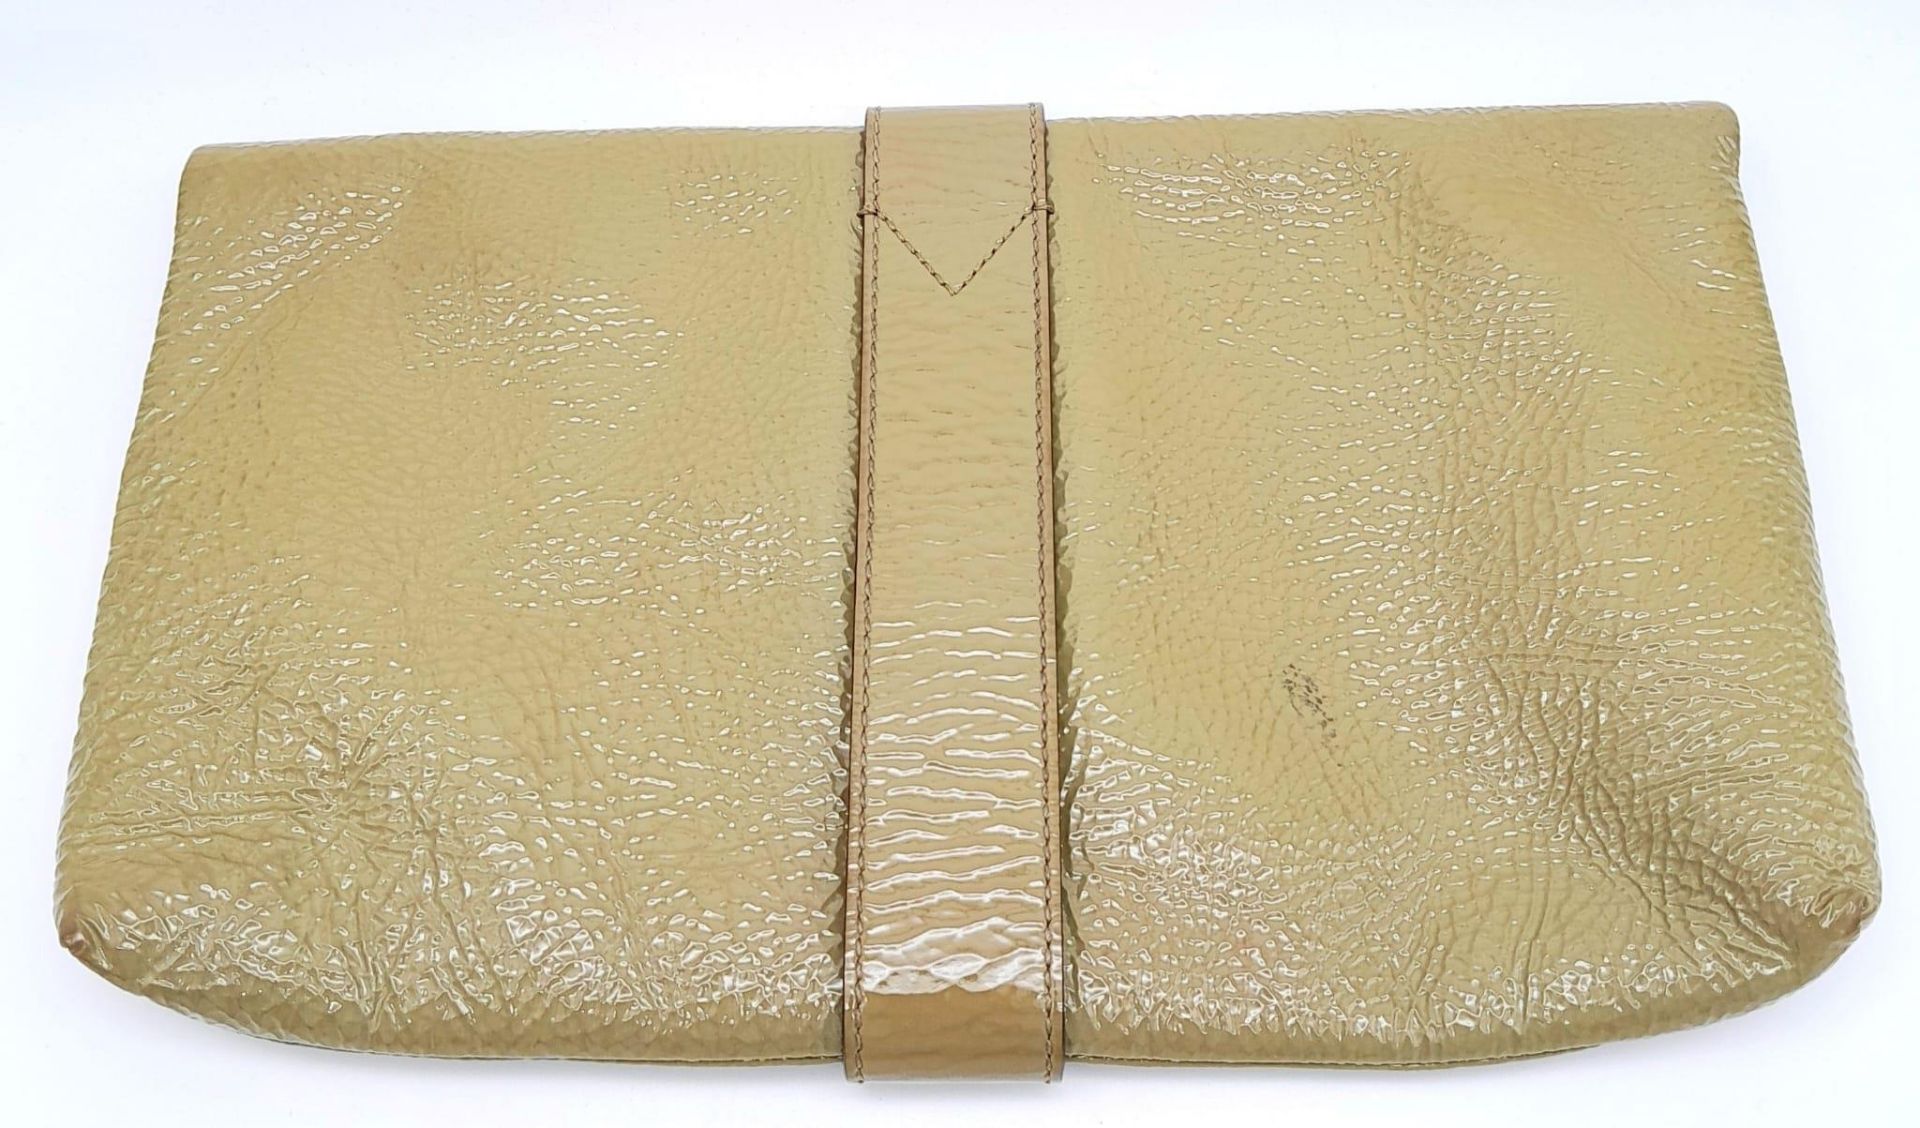 A Mulberry Harriet Khaki Leather Clutch Bag. Spongy patent leather exterior with gold-tone hardware, - Image 2 of 10